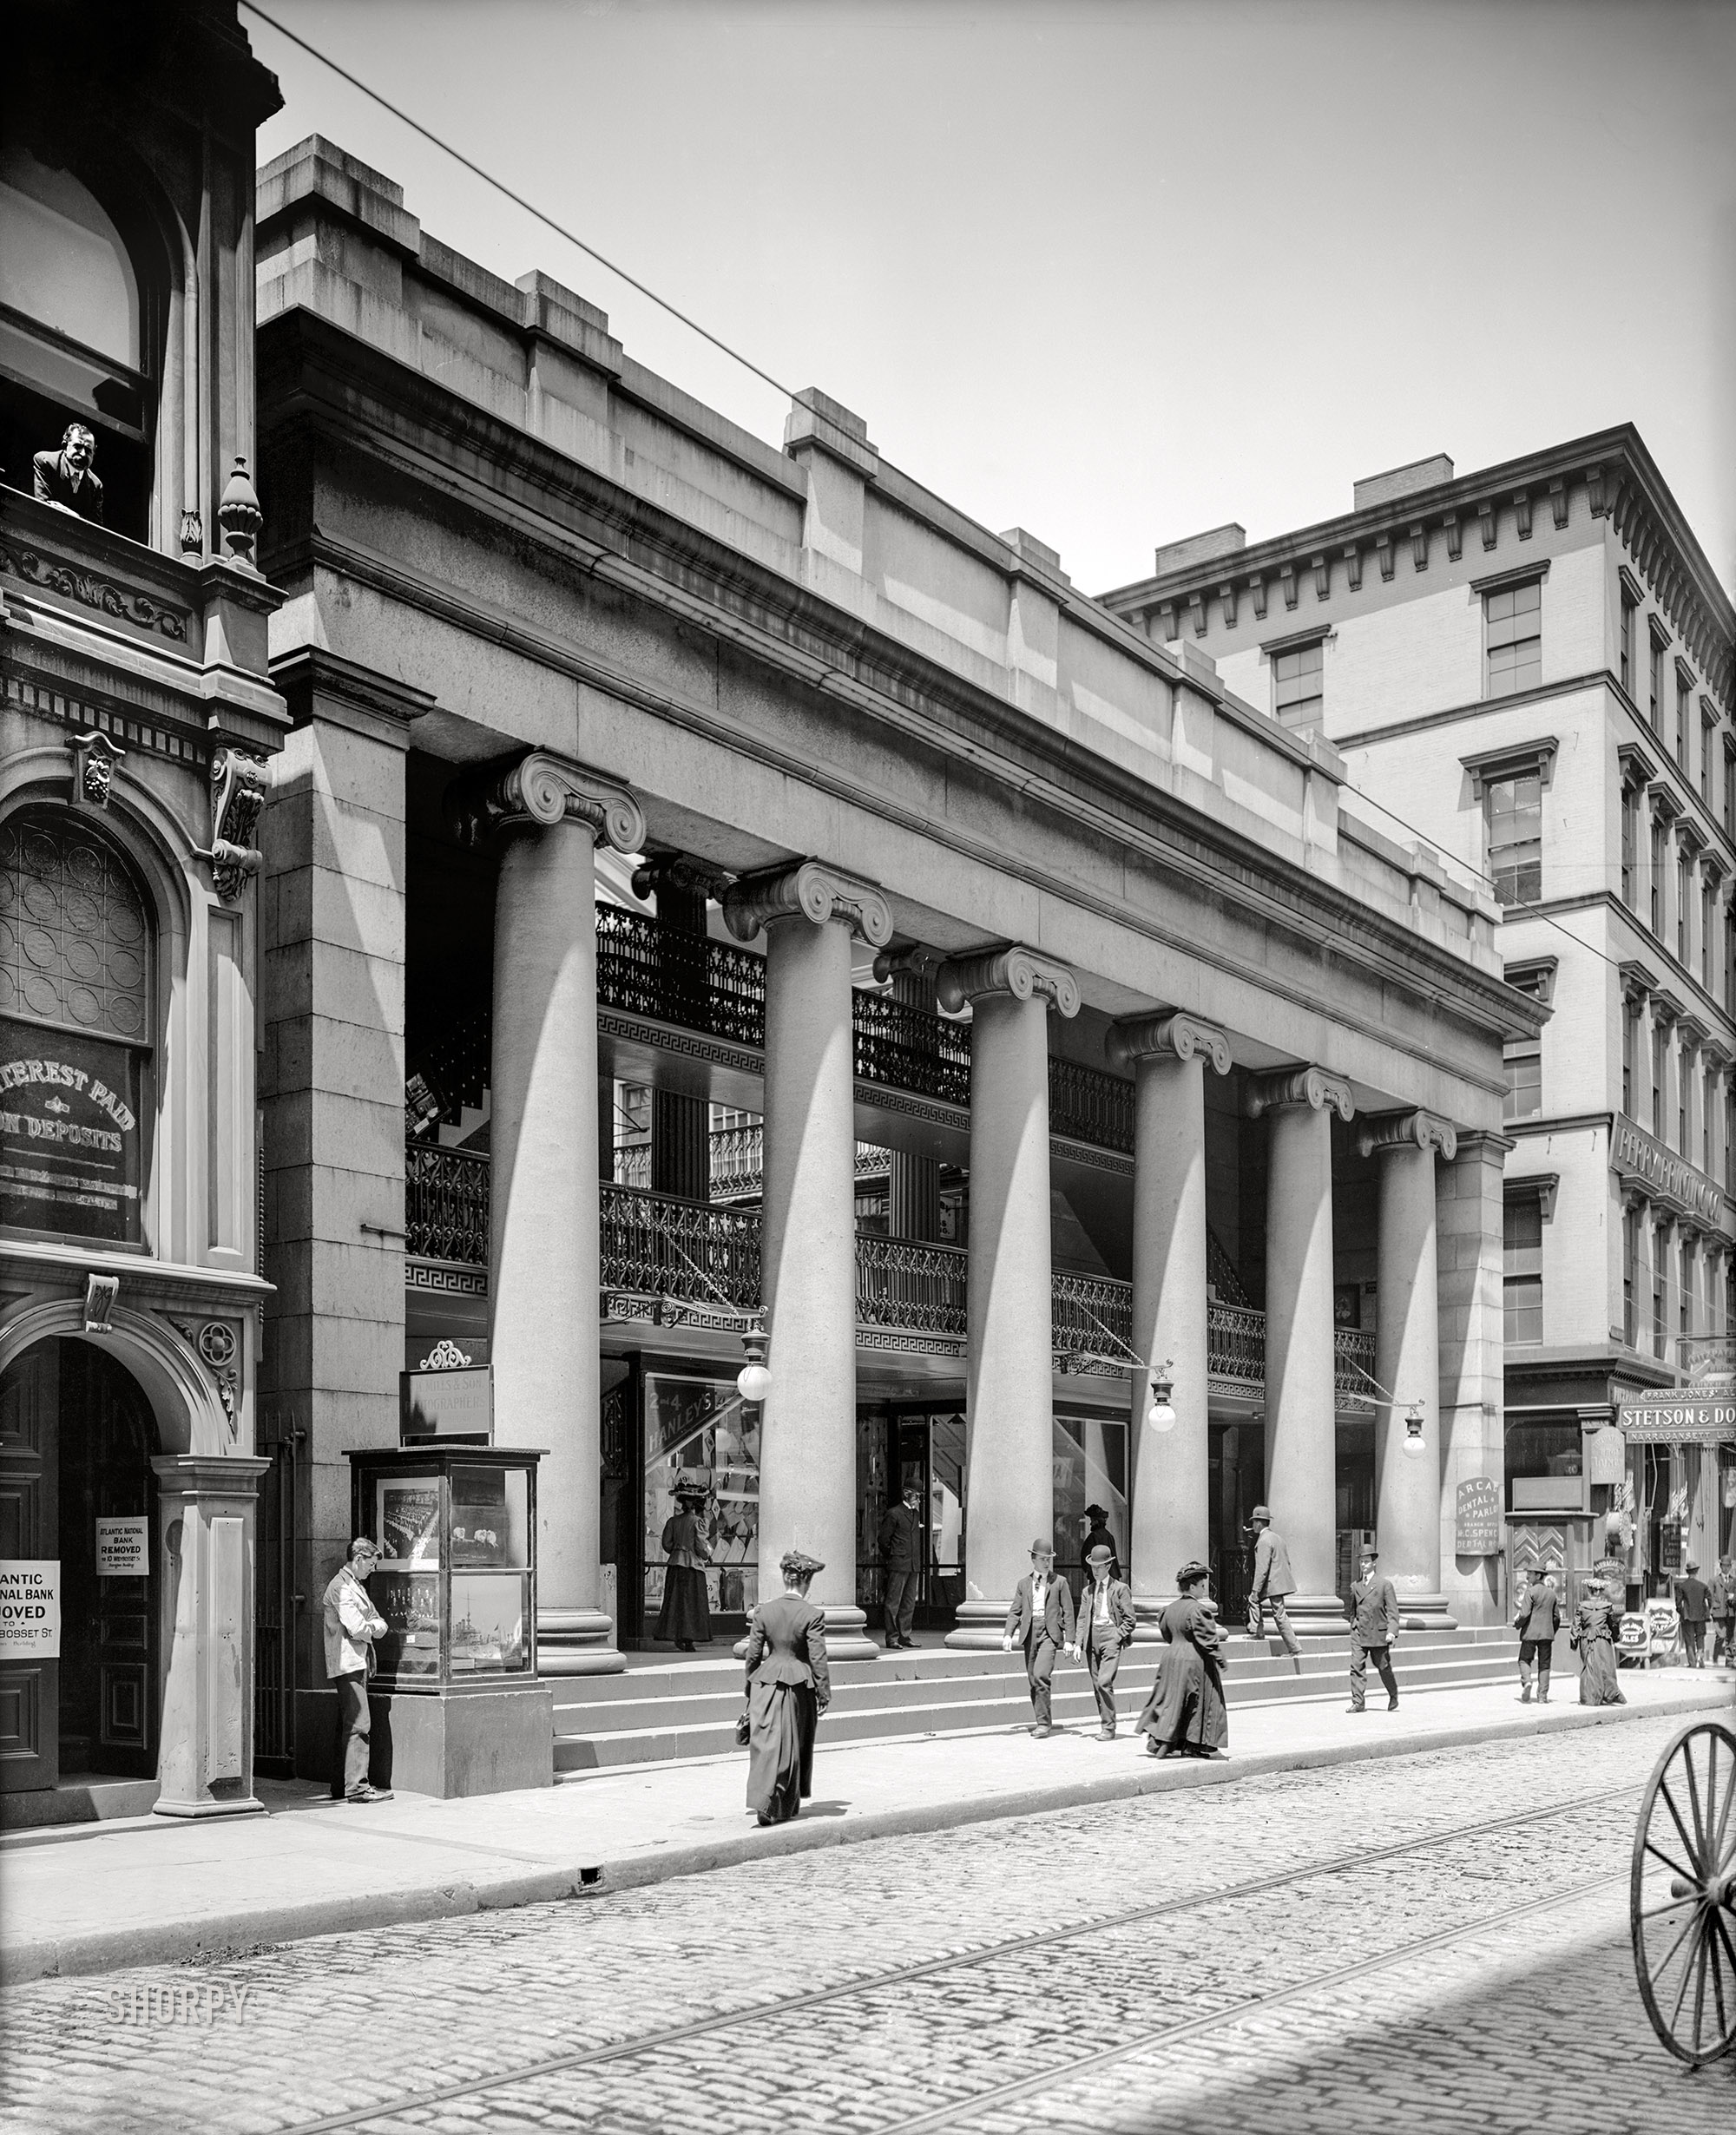 1906. "The Arcade -- Providence, Rhode Island." This 1828 Greek Revival structure, fronting on Westminster and Weybosset streets, bills itself as the first enclosed shopping mall in the United States. 8x10 inch dry plate glass negative, Detroit Publishing Company. View full size.